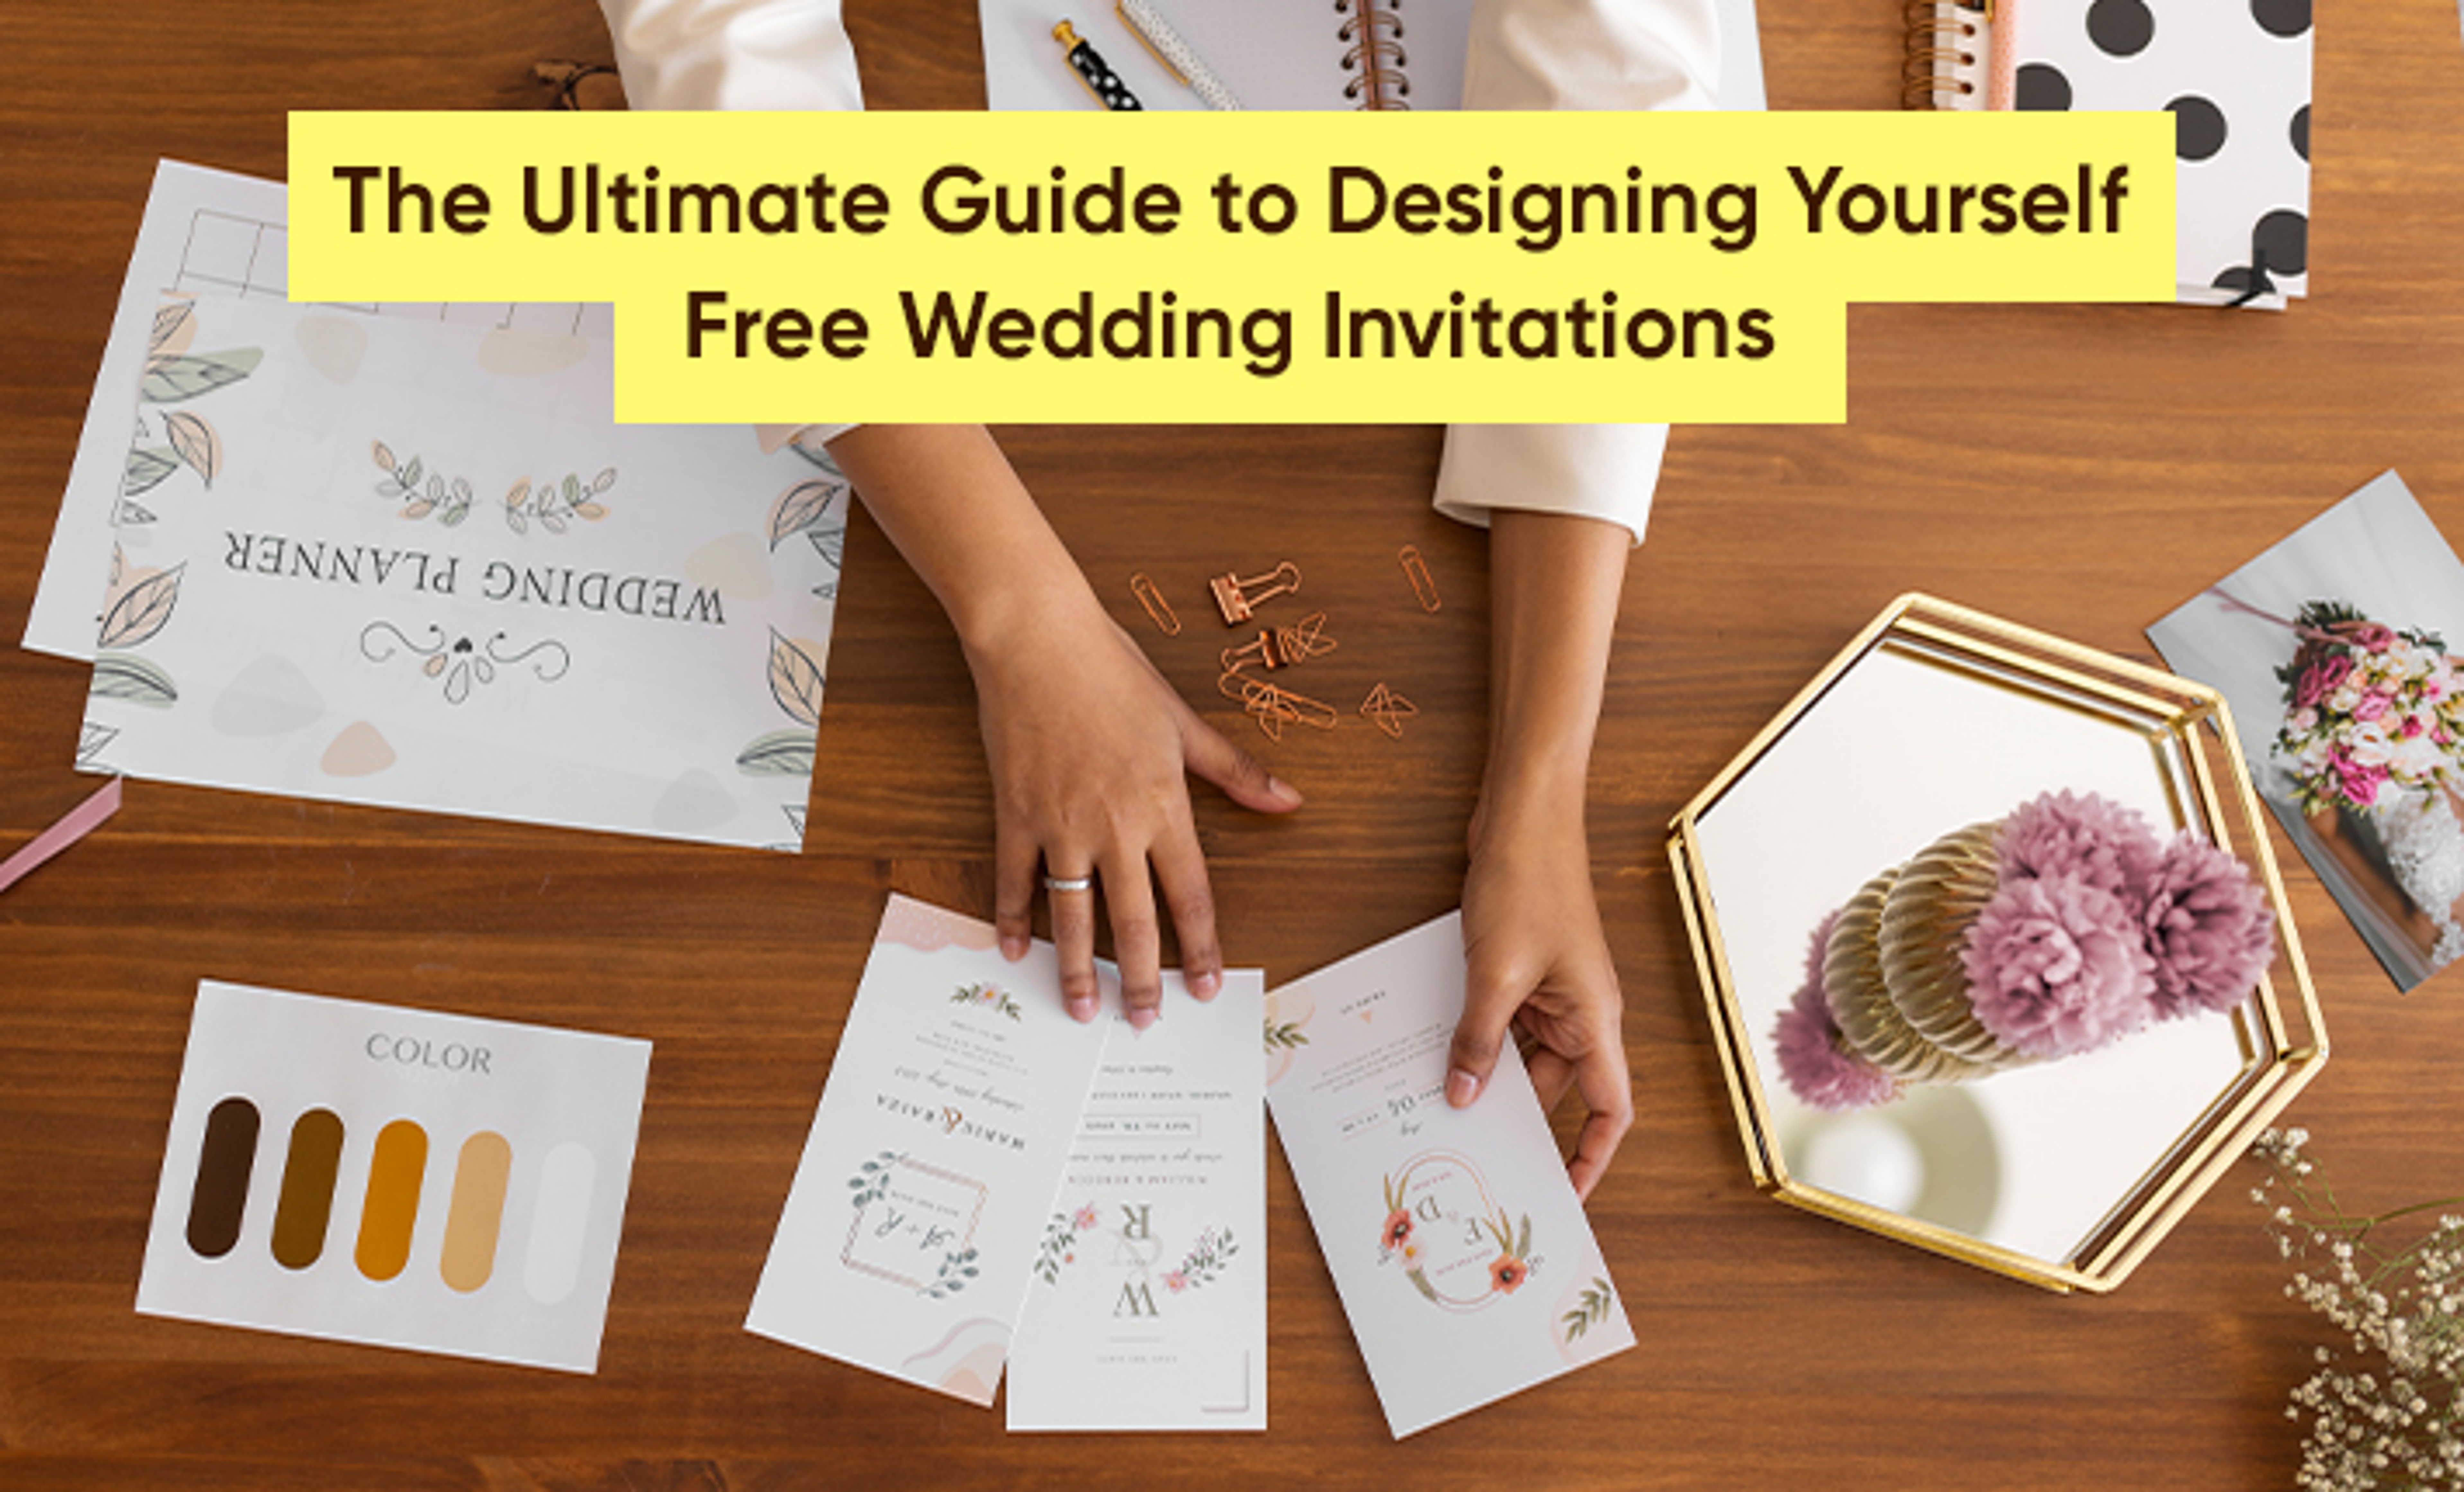 The Ultimate Guide to Designing Yourself Free Wedding Invitations